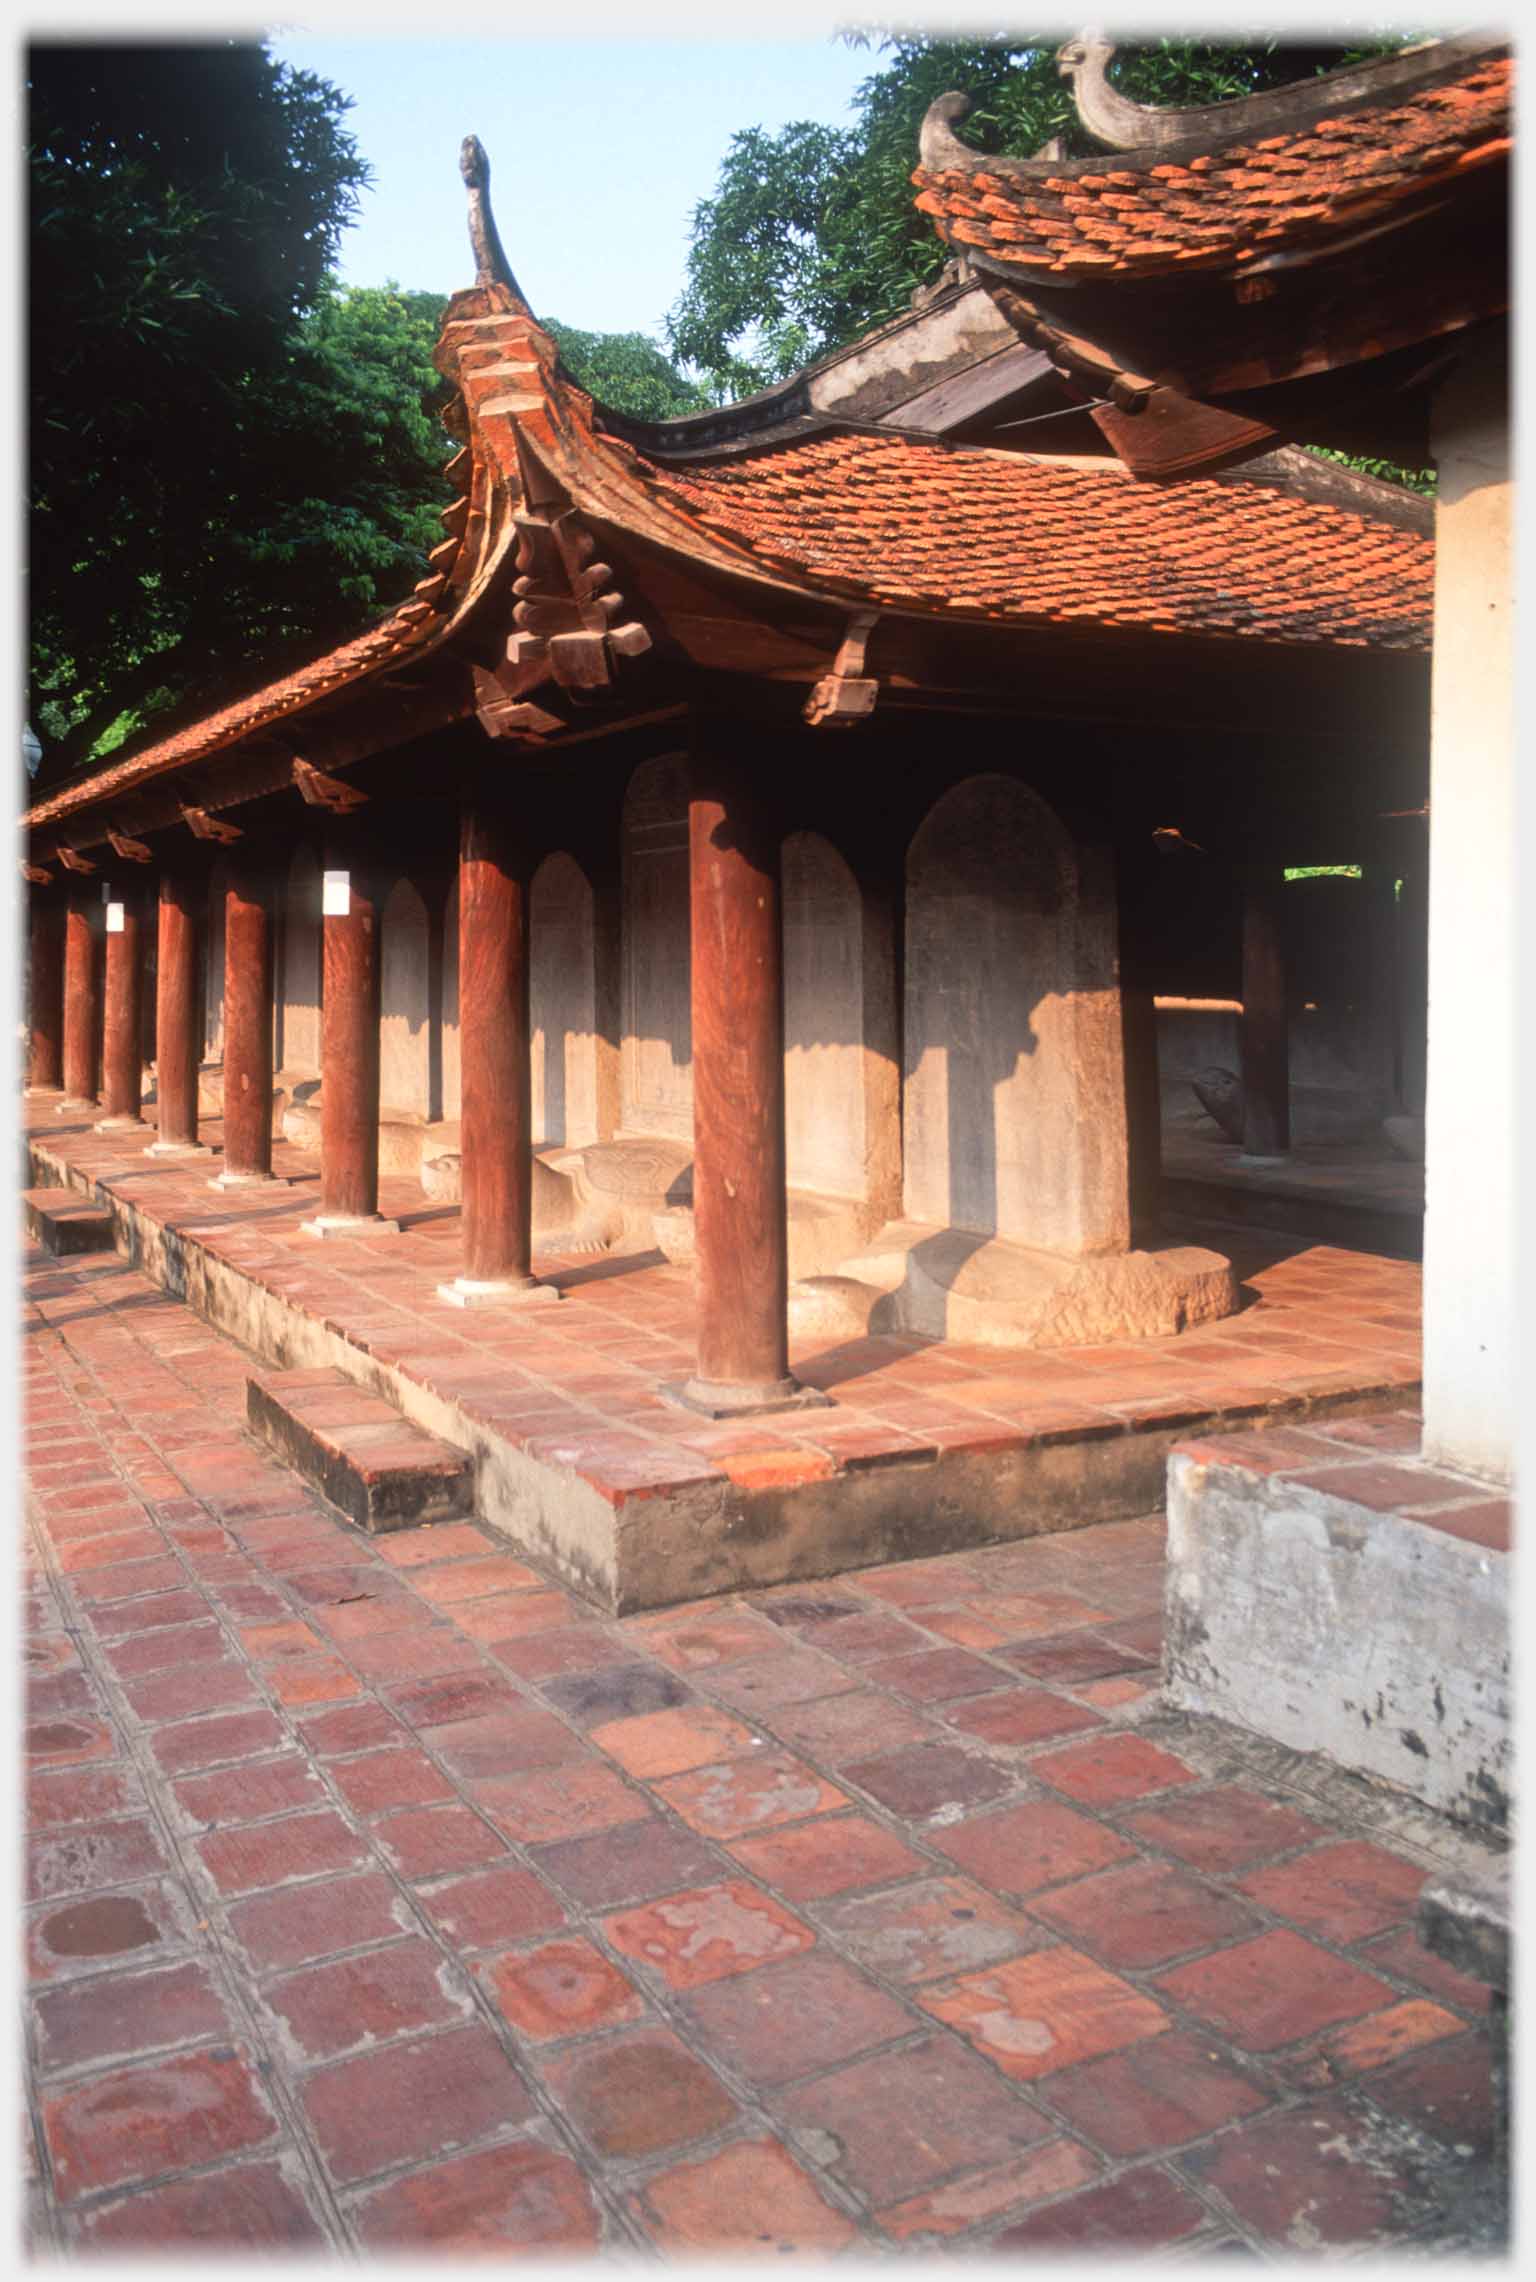 Looking along pavilion with  wooden pillars and stelae.